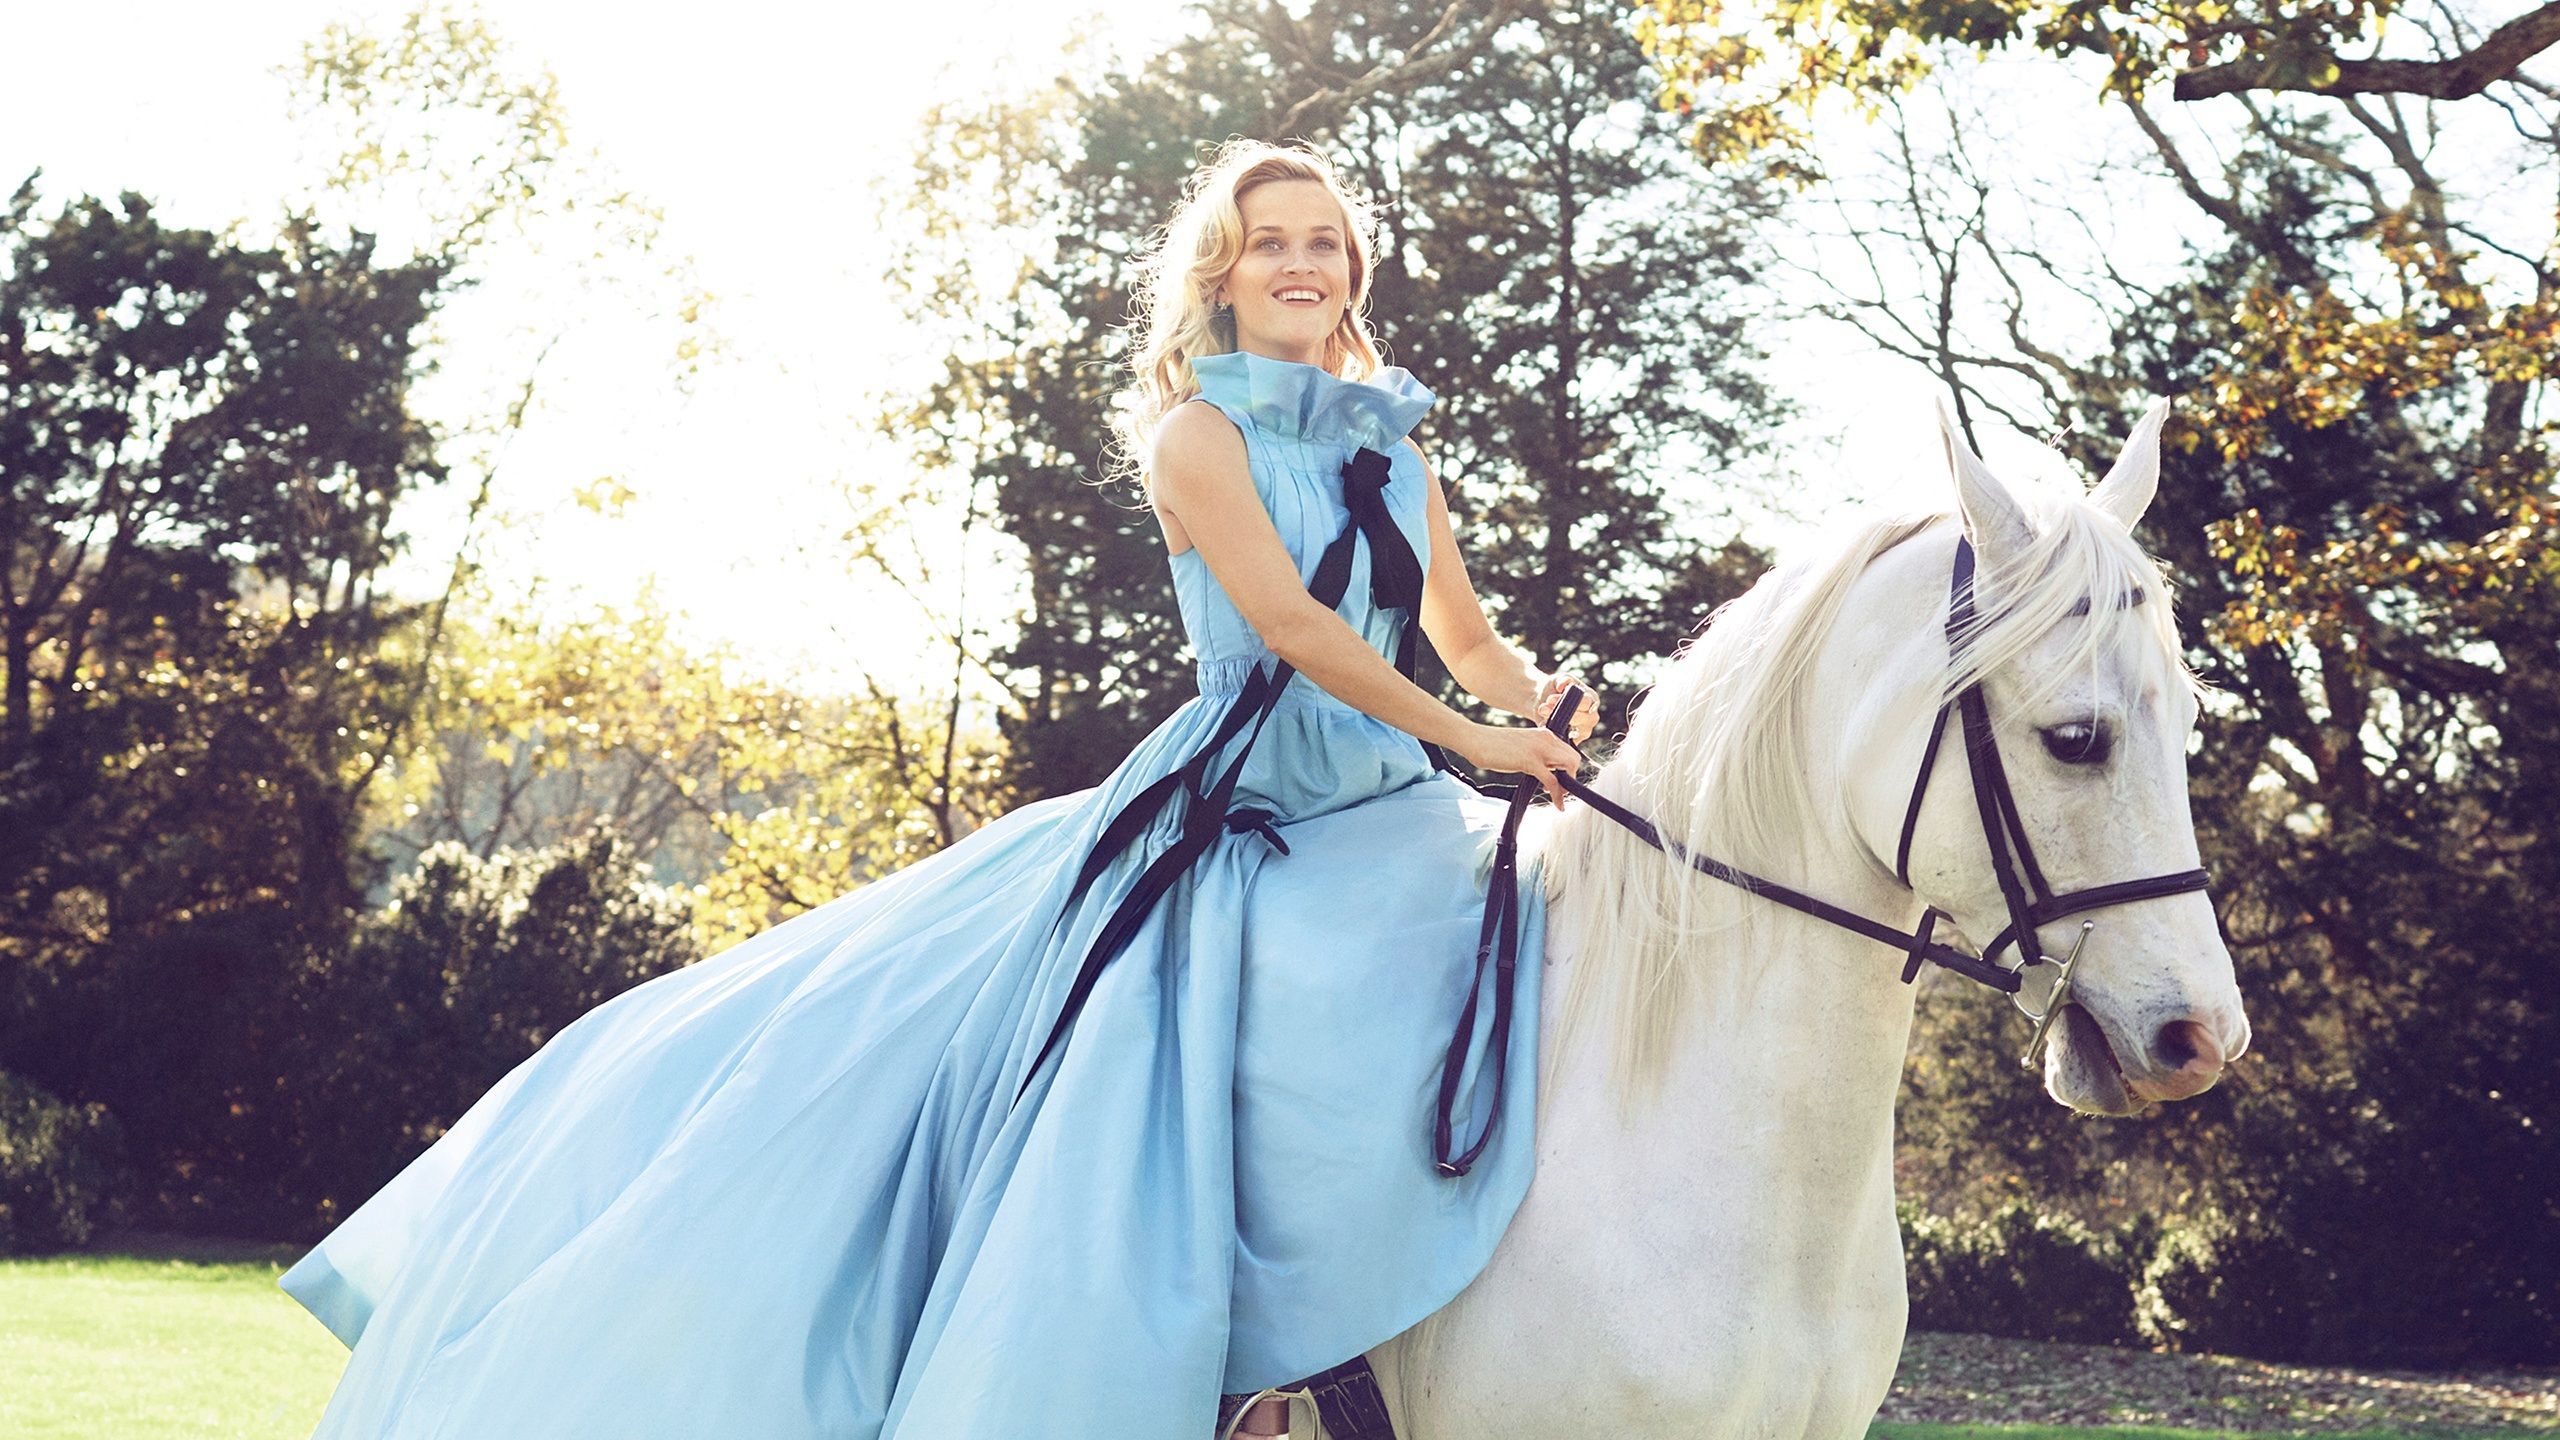 Wallpaper Blue dress girl riding white horse 2560x1600 HD Picture, Image